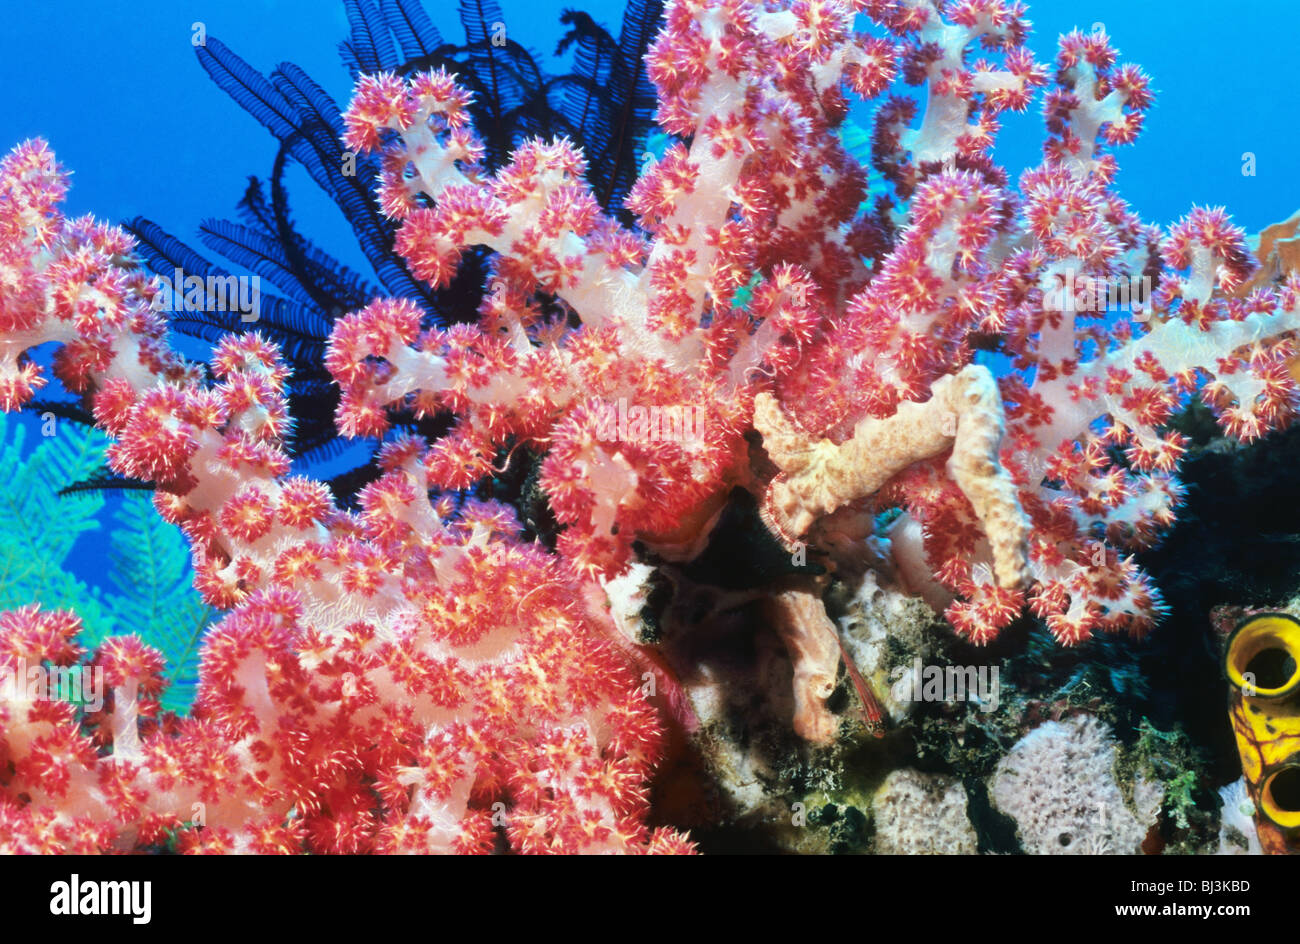 Coral. Spiky soft coral. Dendronephthya sp., underwater in the Flores Sea. Komodo National Park. Underwater photography. Stock Photo